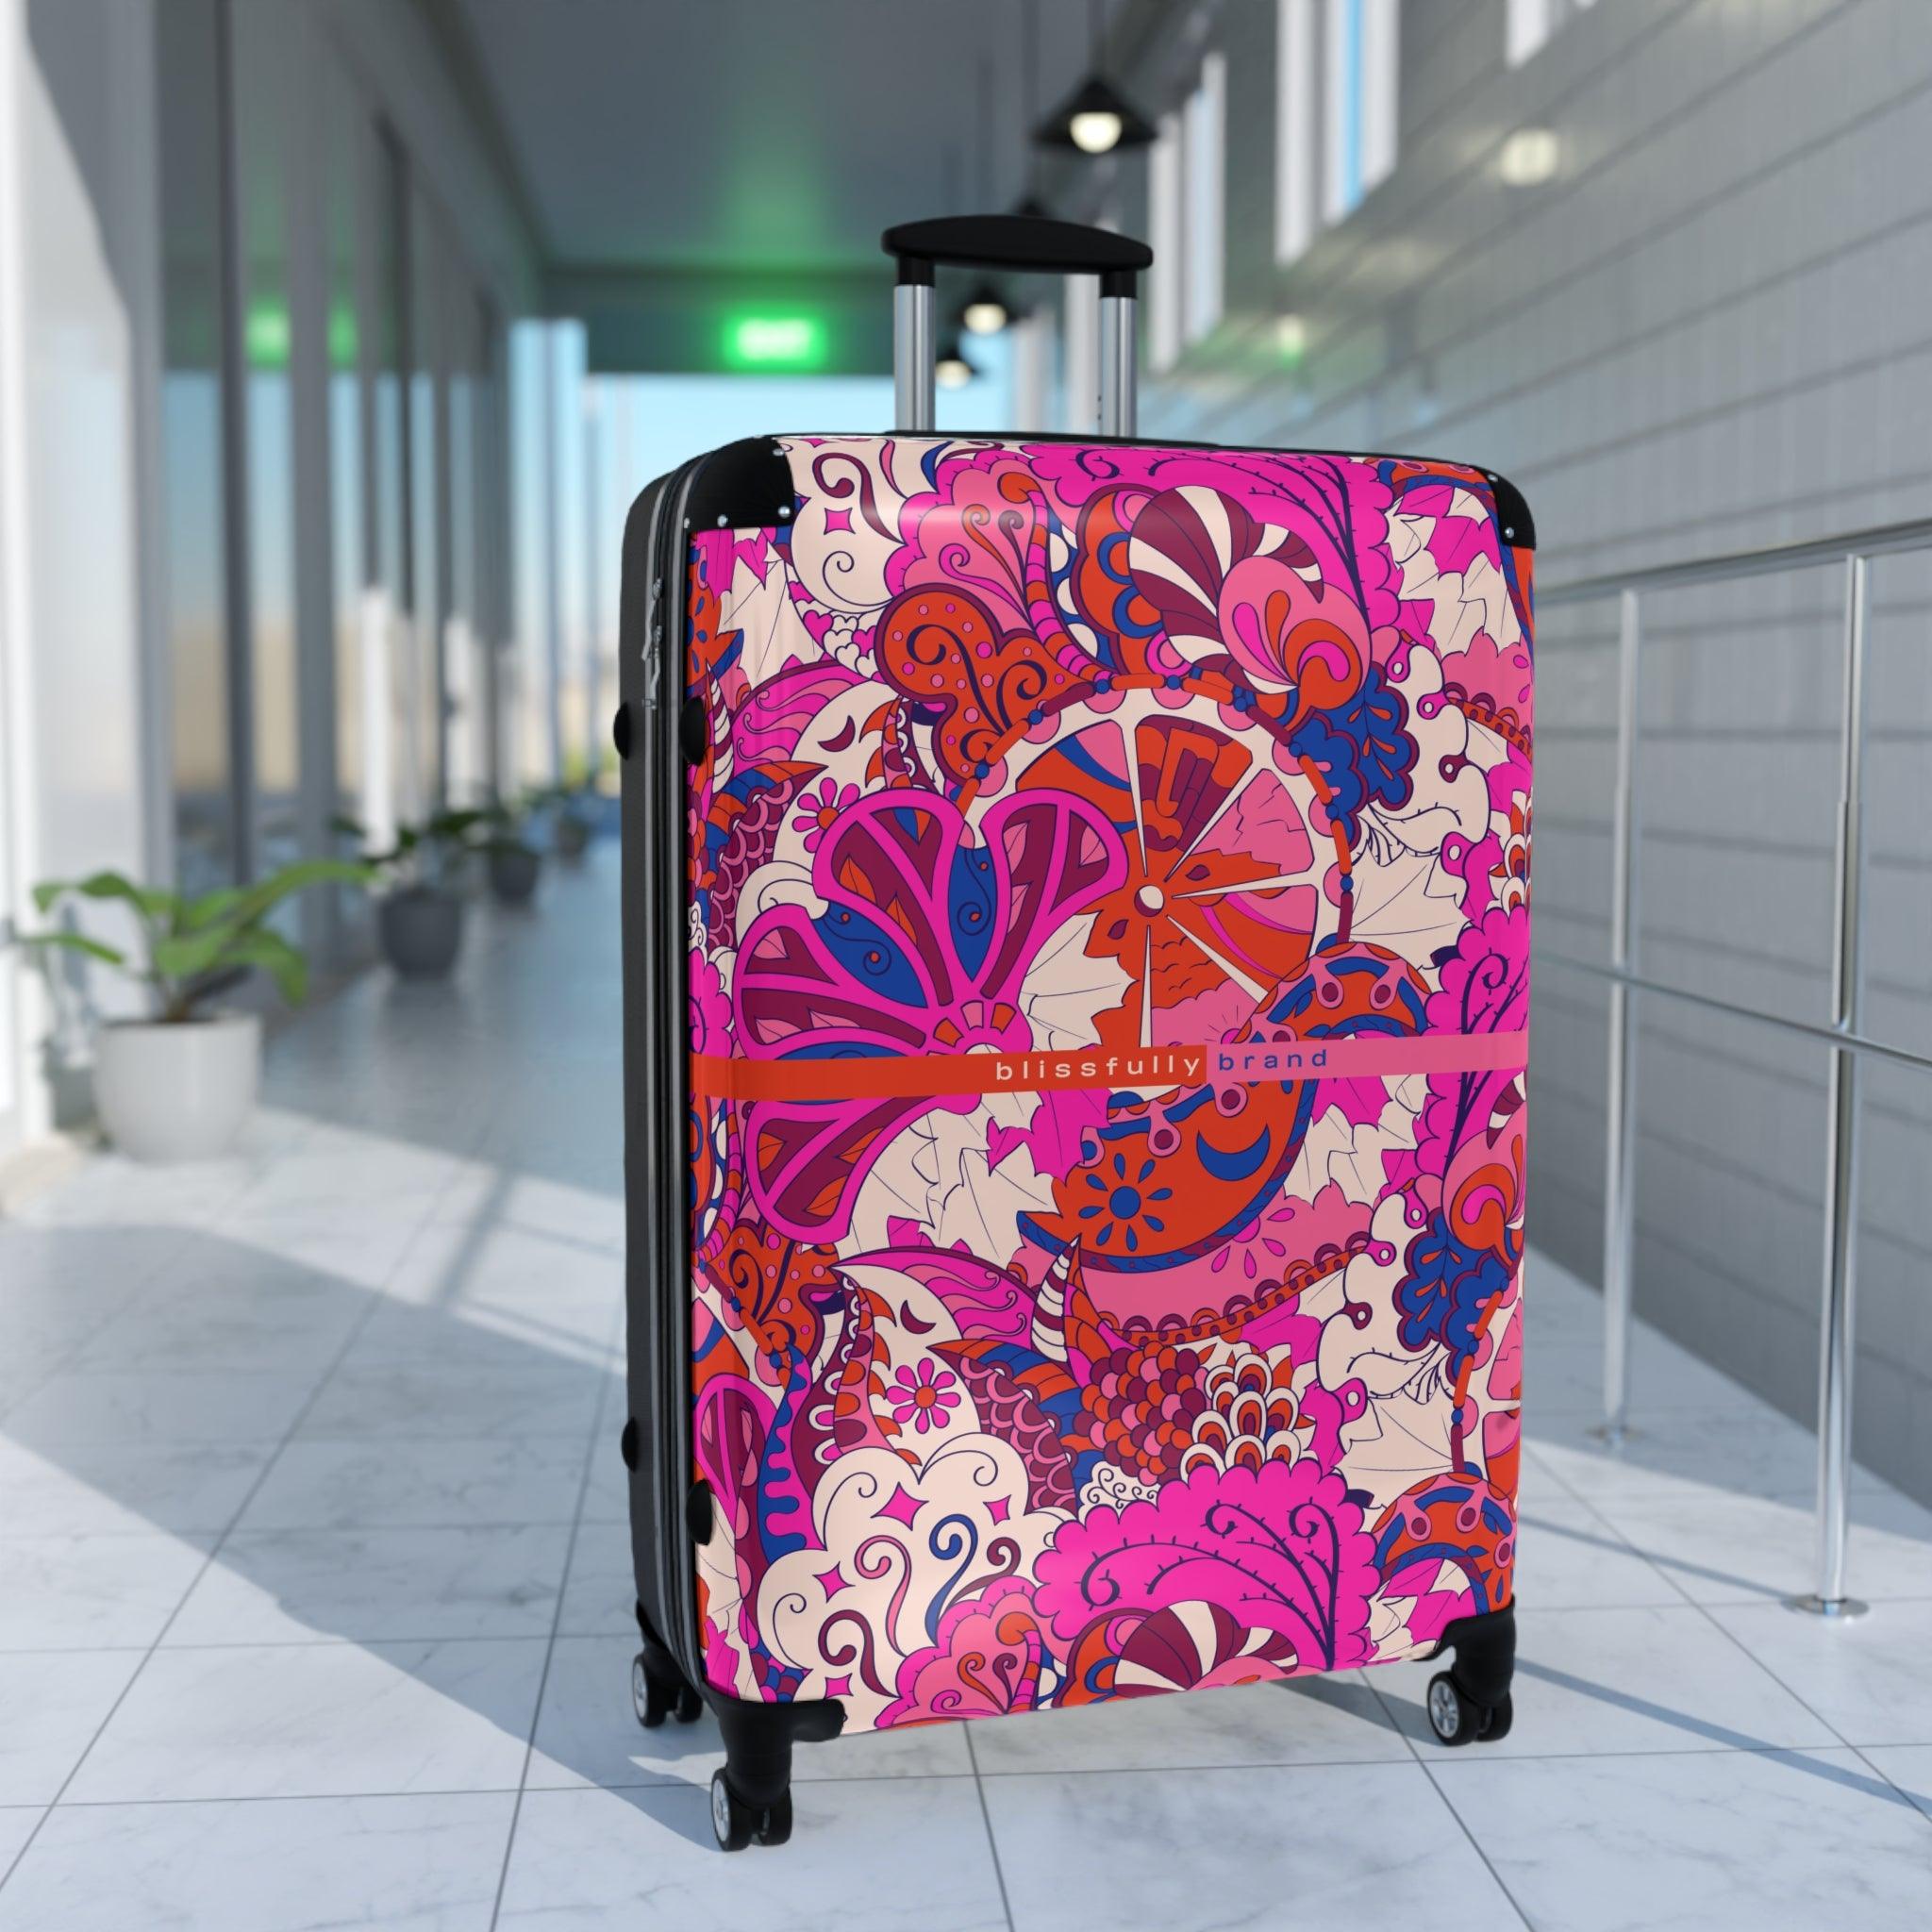 Sameria Luggage Collection - Abstract Kaleidoscope Paisley Floral Print Psychedelic Retro Swirls Funky Multicolor Check in Carry On Roller 360 Hard Shell Unique Retro Vibrant Bold Pink Red